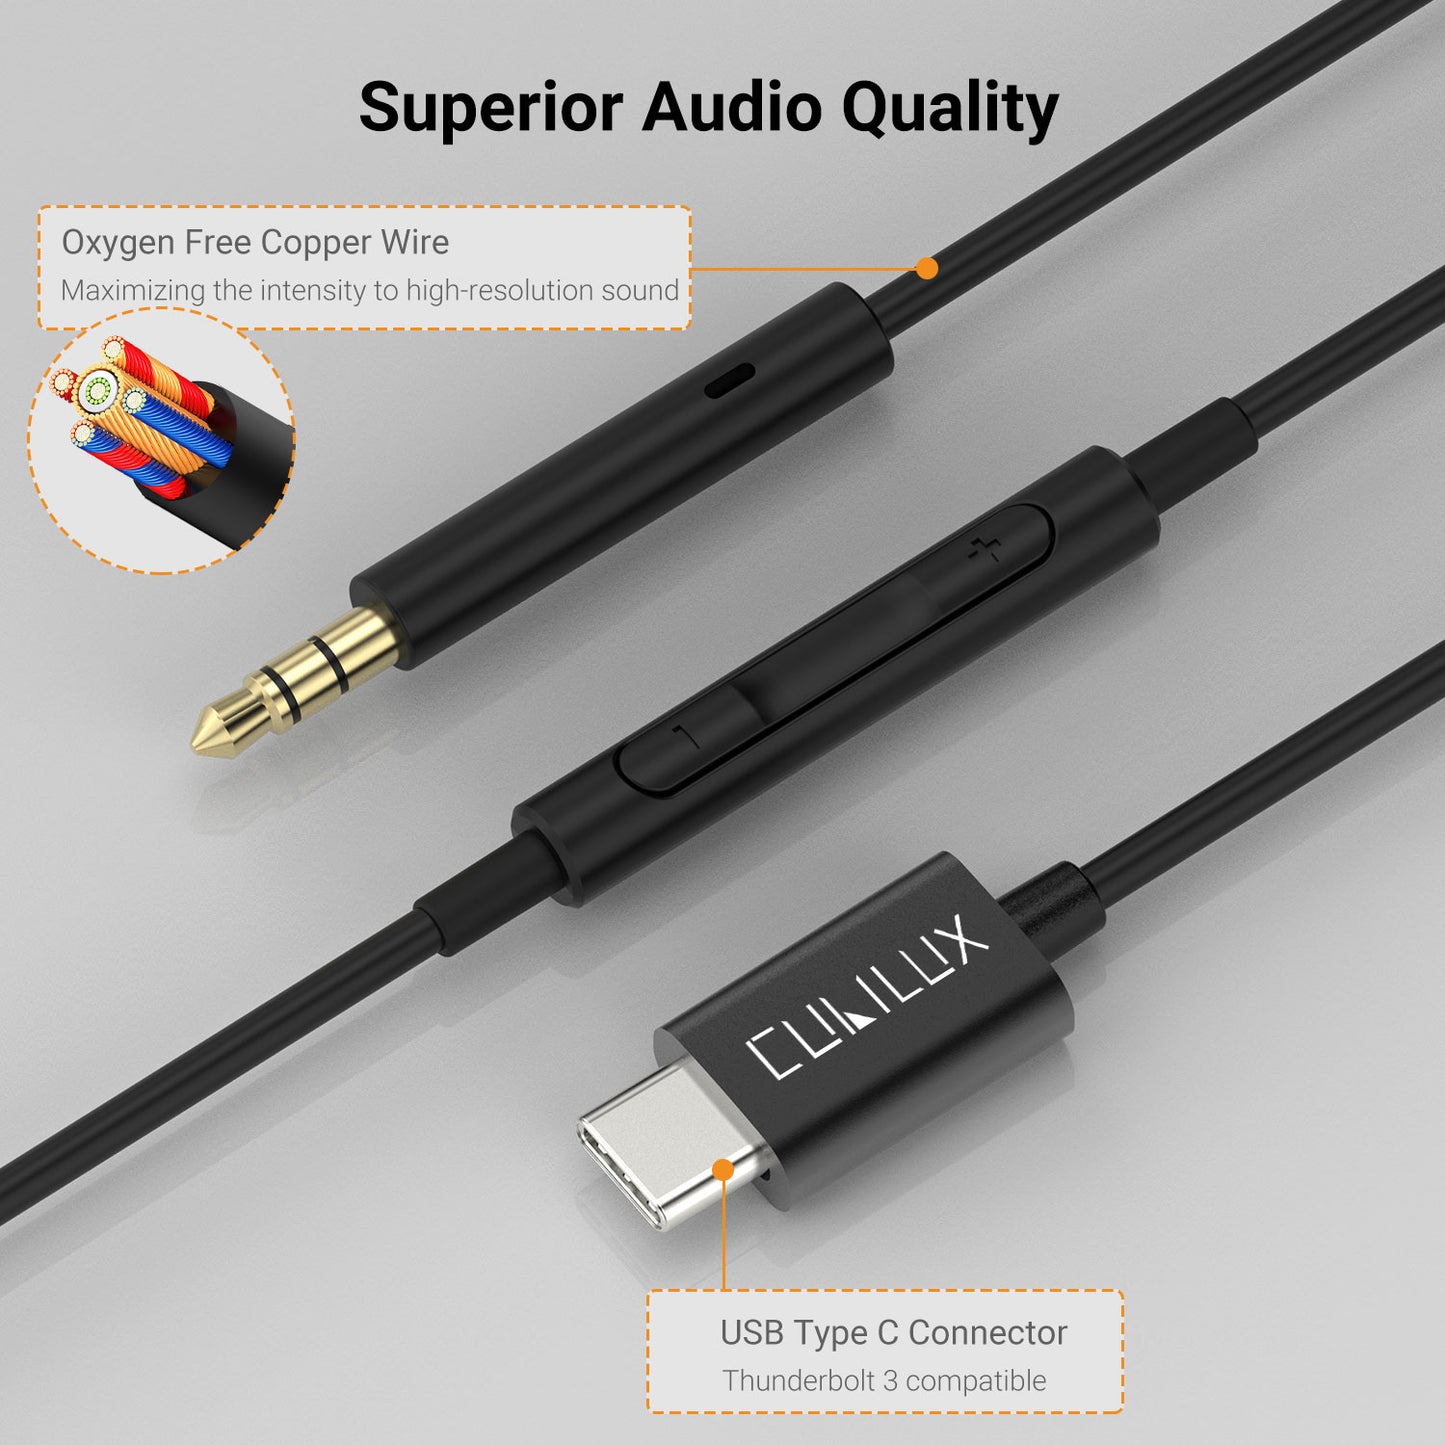 USB C to 2.5mm Headphone Cable-Black,4 FT